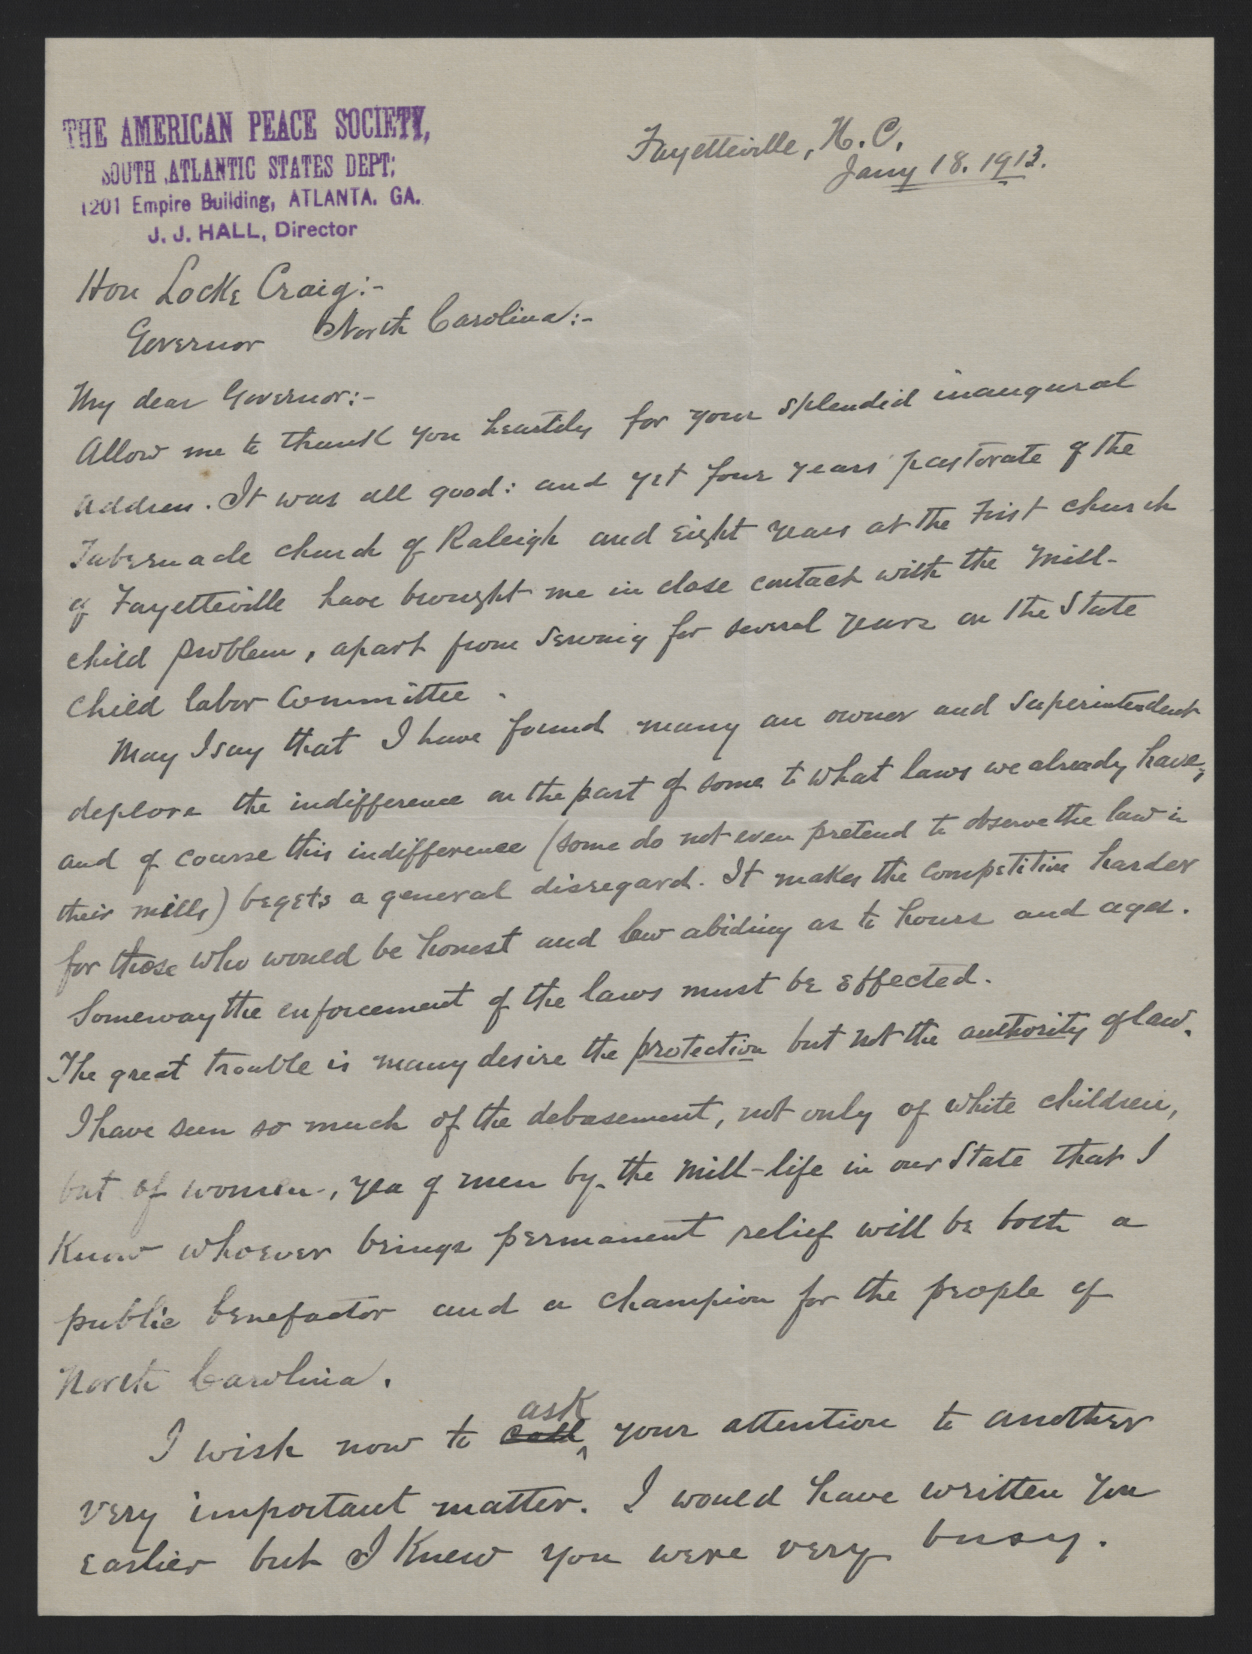 Letter from Hall to Craig, January 18, 1913, page 1